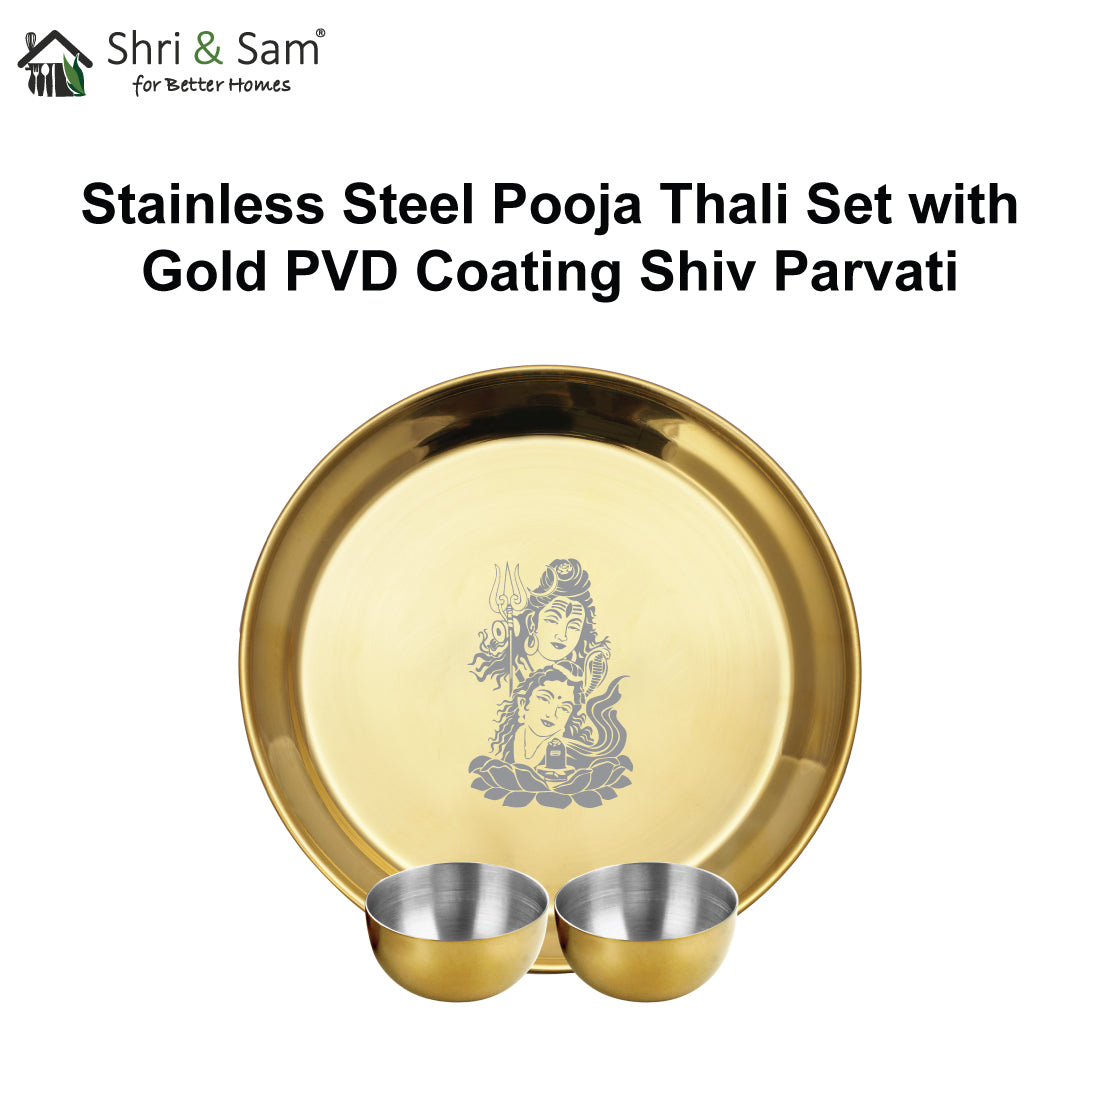 Stainless Steel Pooja Thali Set with Gold PVD Coating Shiv Parvati